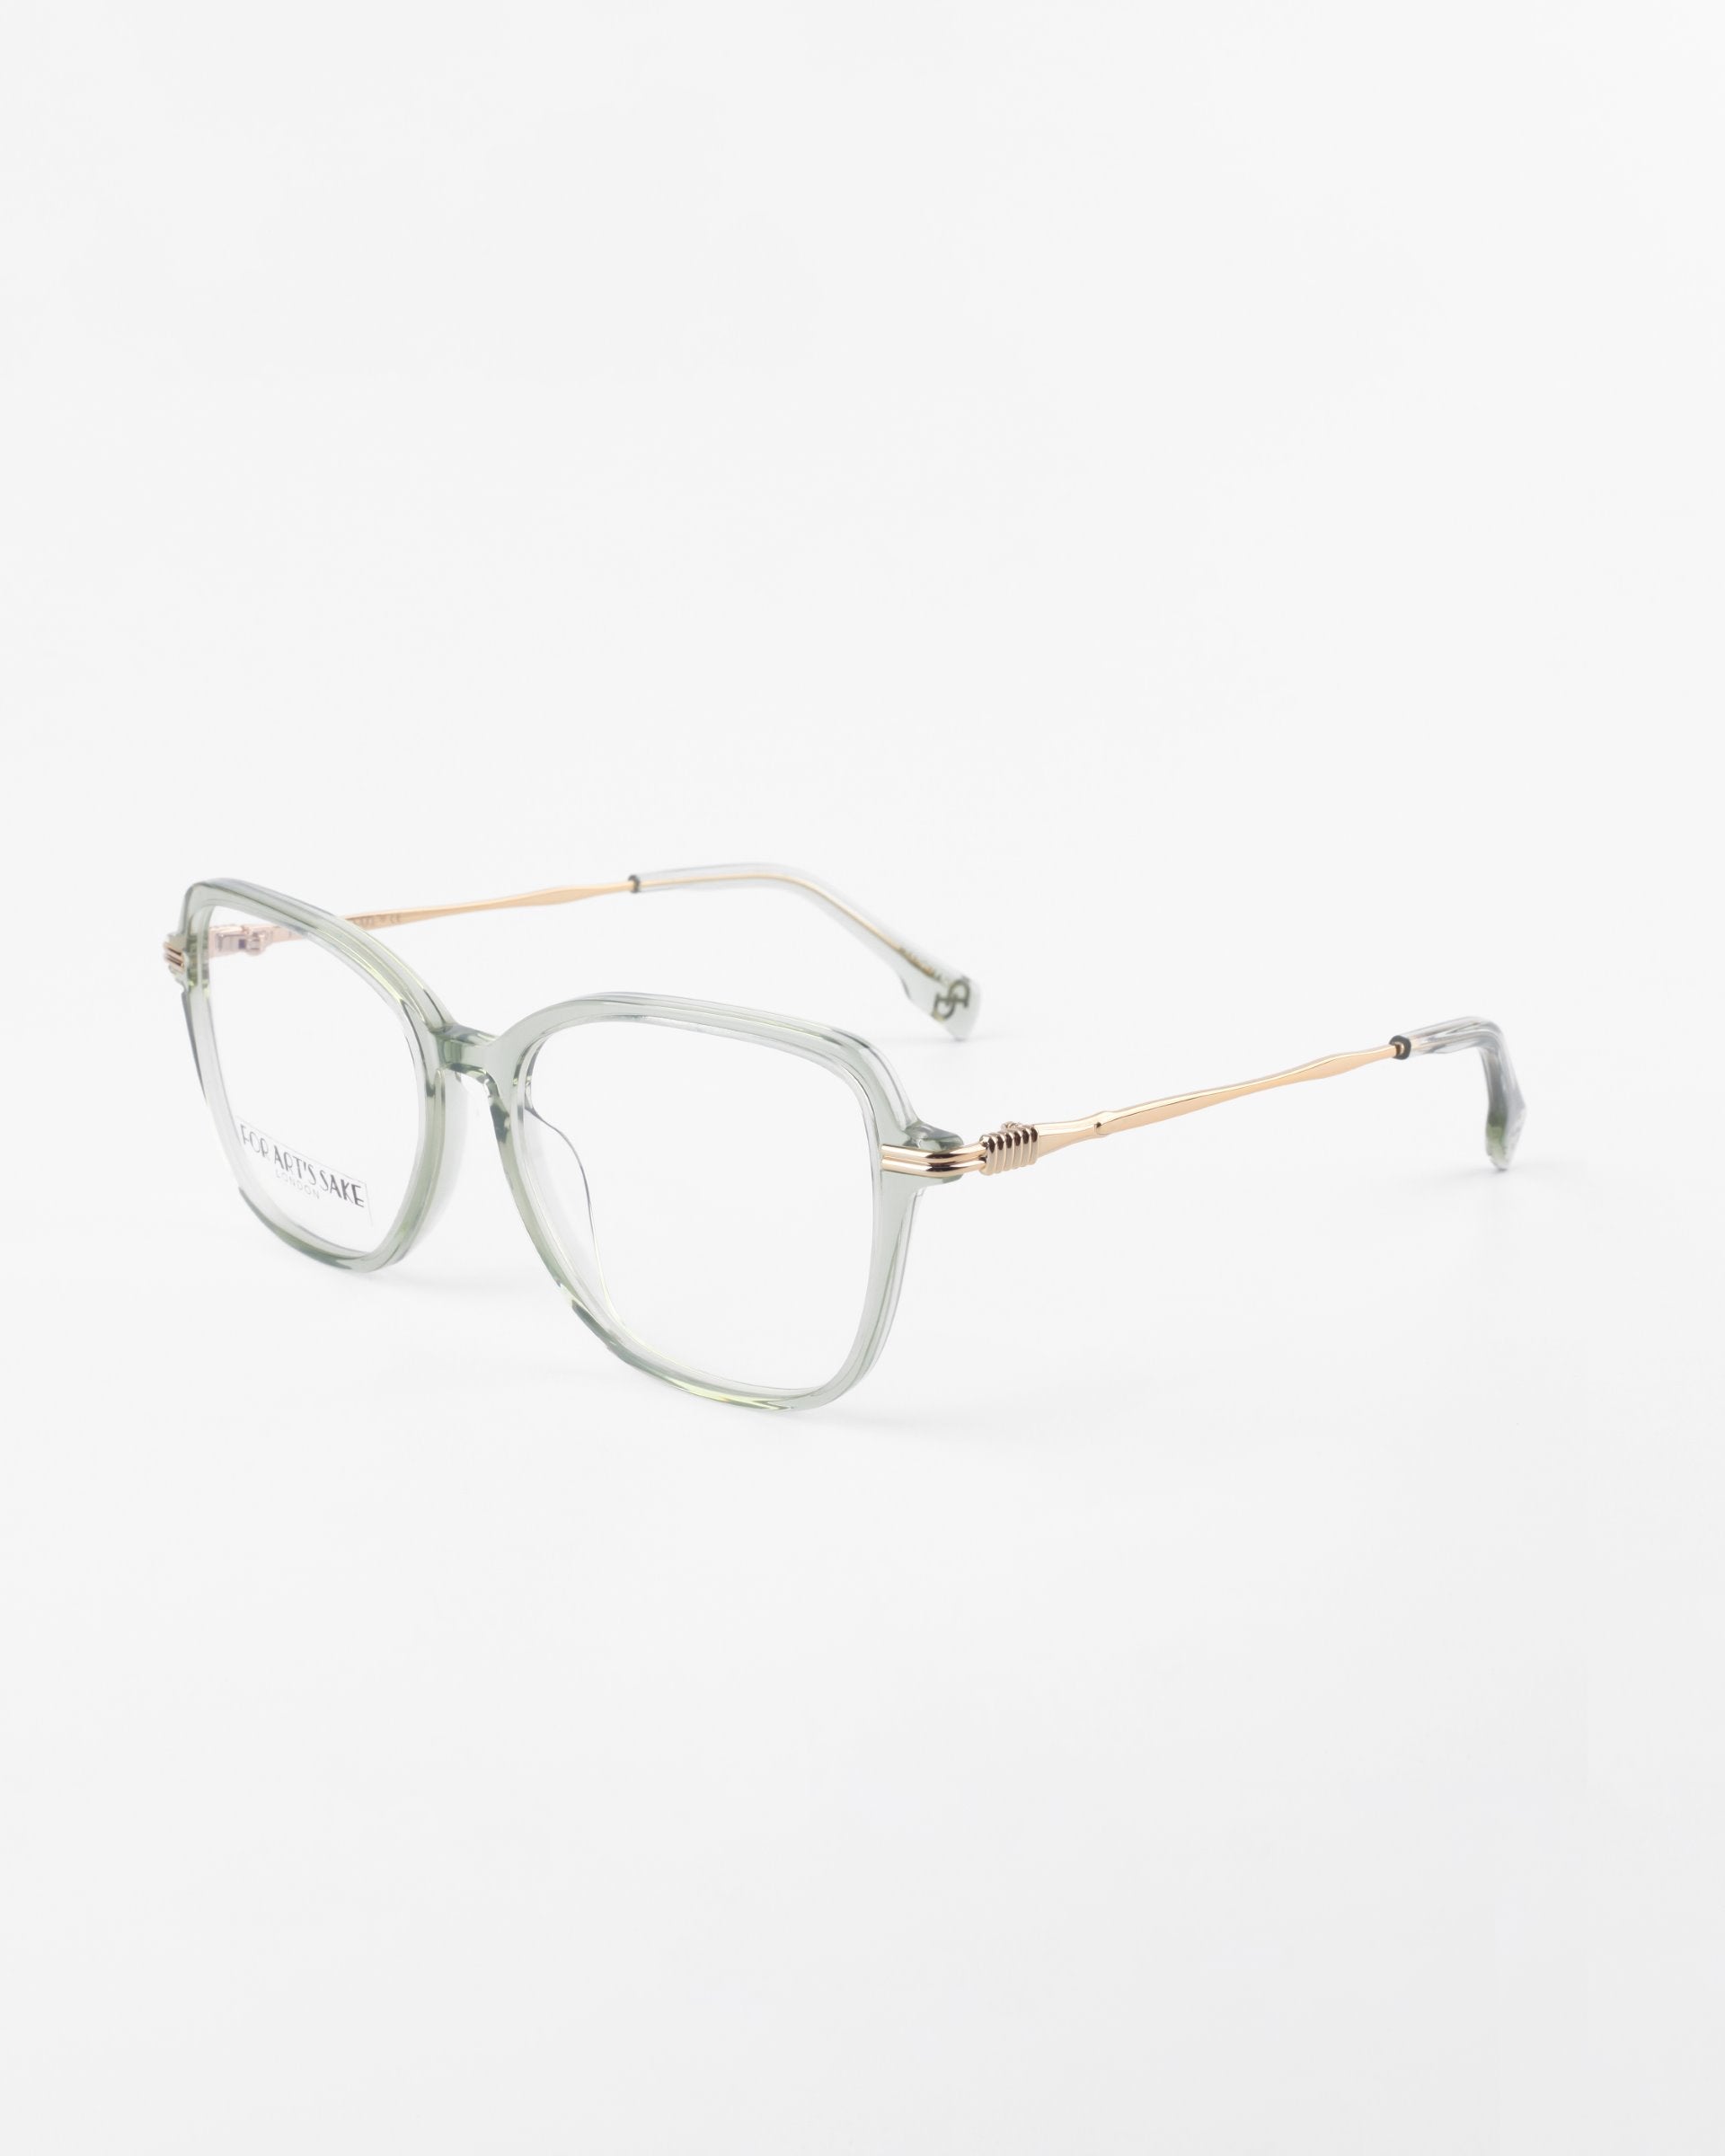 A pair of For Art&#39;s Sake® Sonnet glasses with transparent frames and 18-karat gold-plated temples. The glasses have a rounded square shape and clear, prescription lenses, set against a white background.